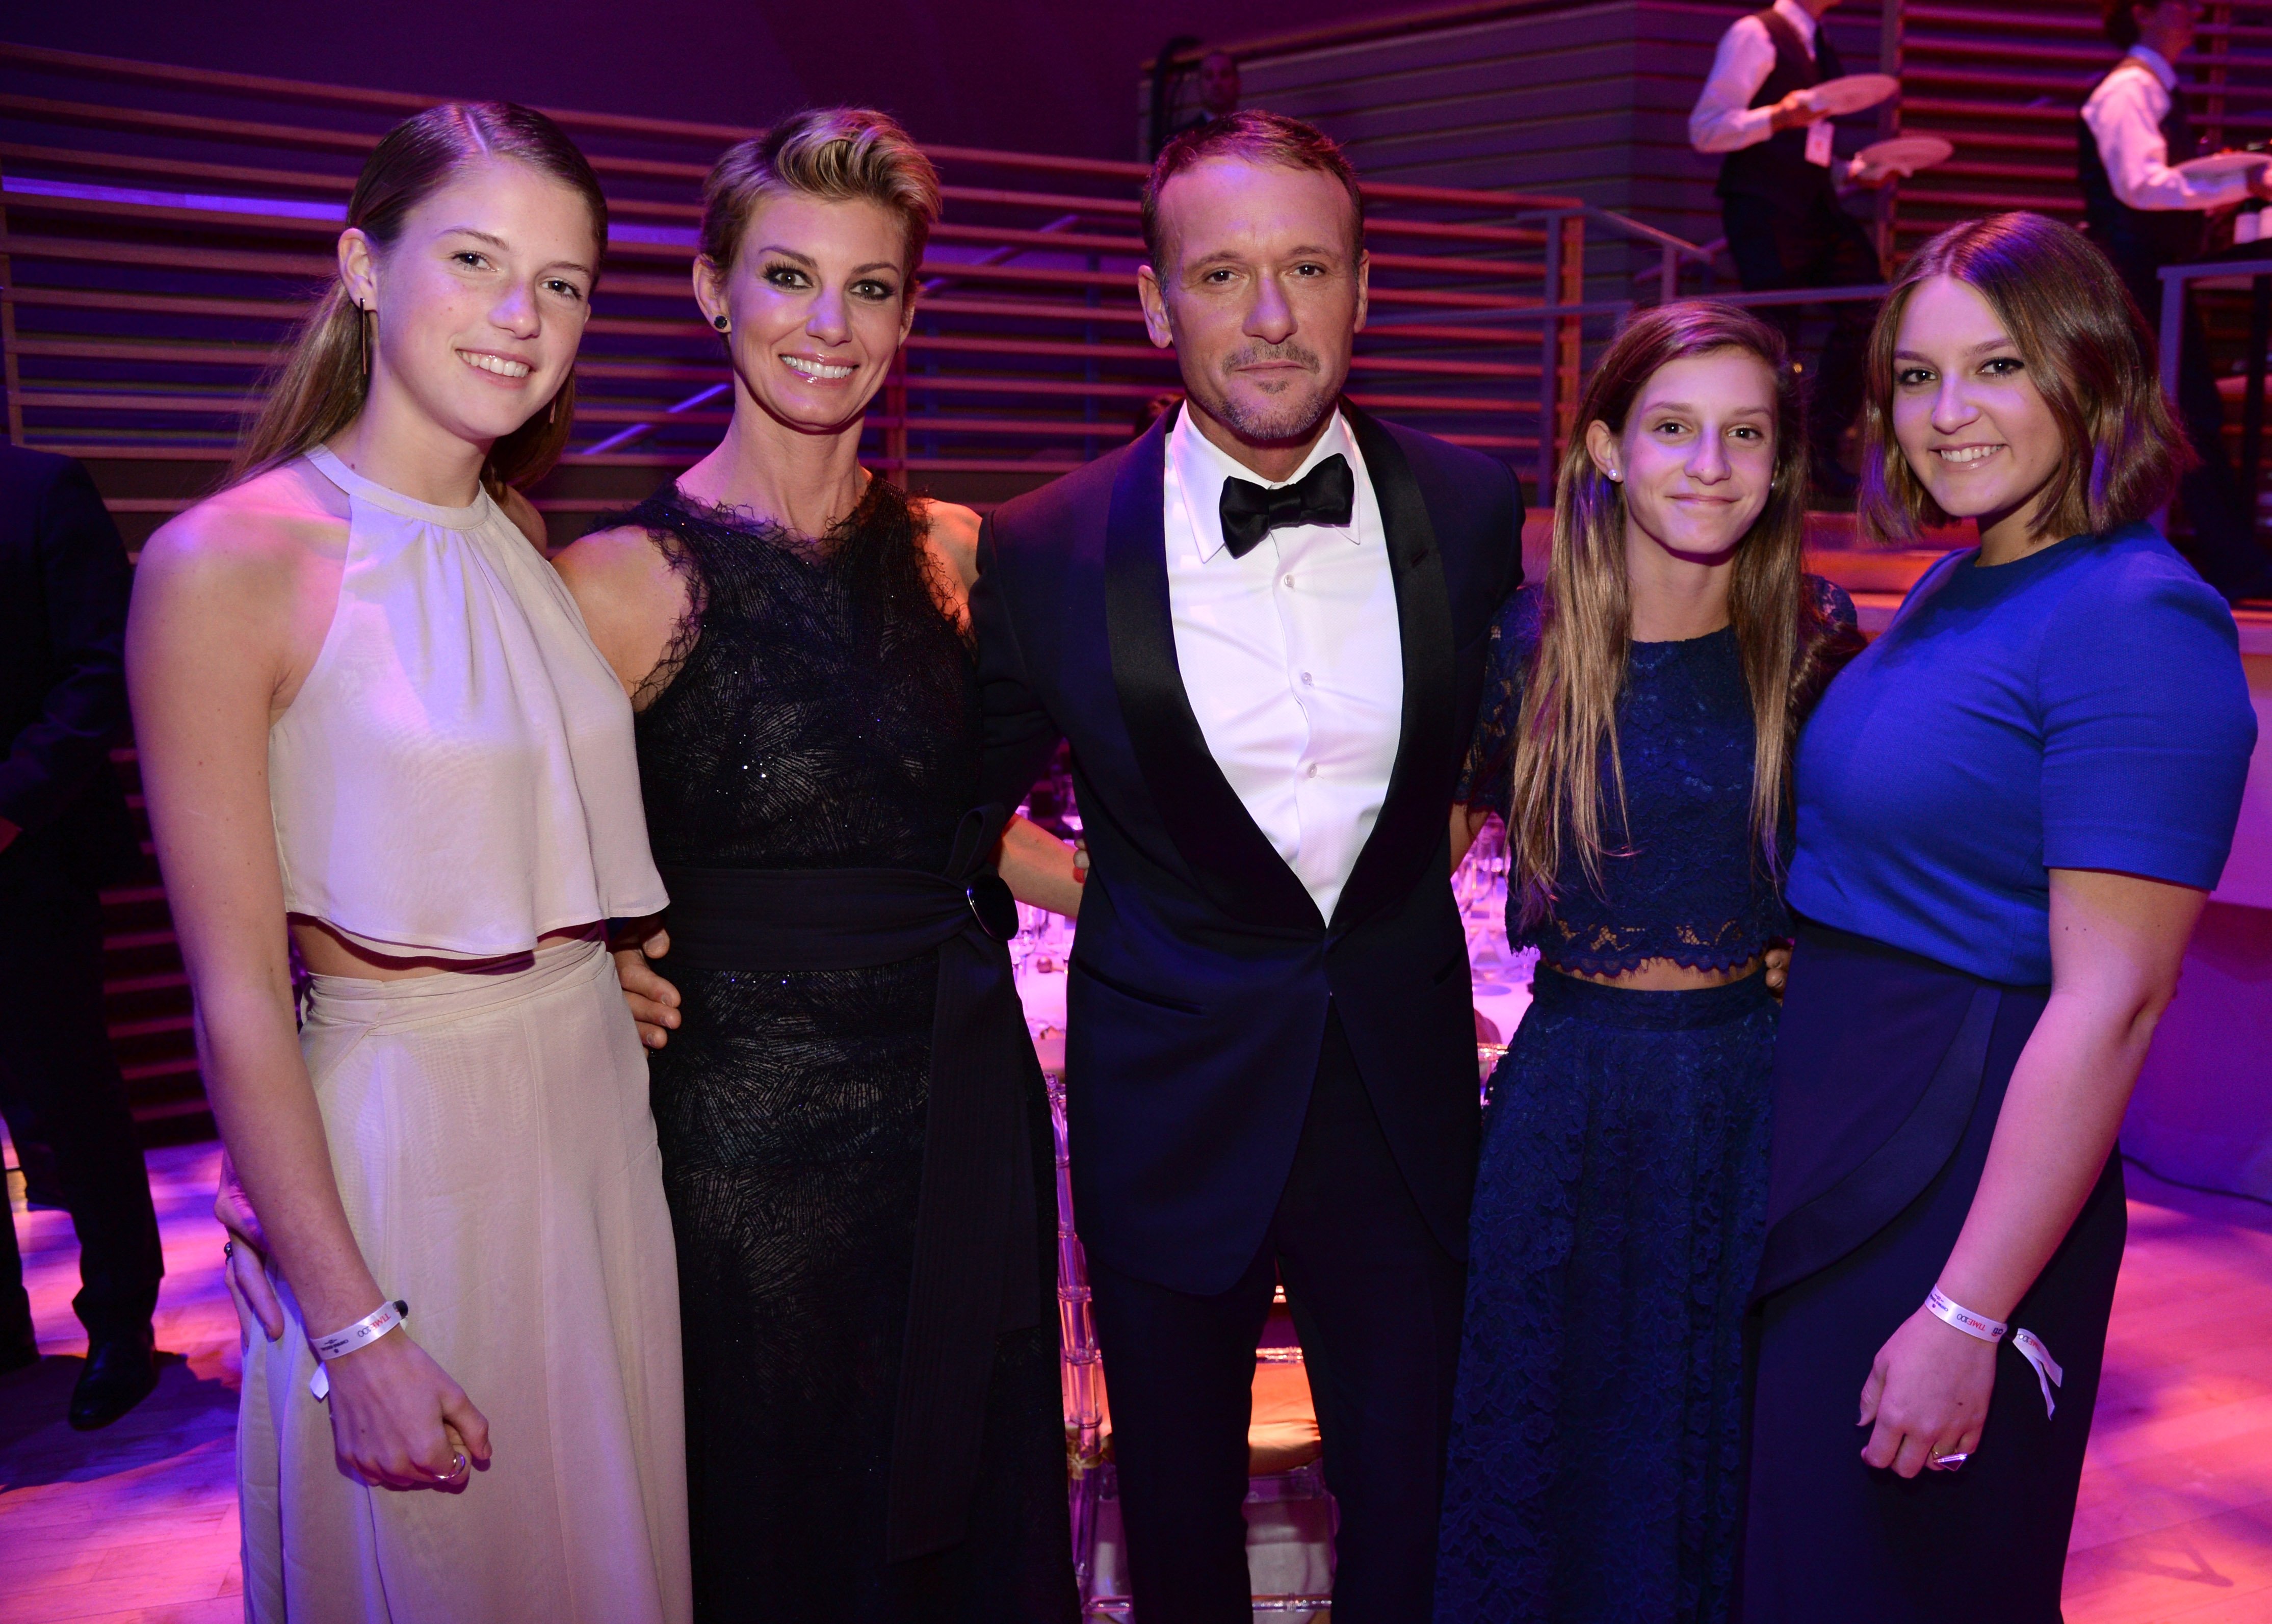 Faith Hill and Tim McGraw with their daughters Gracie, Audrey, and Maggie at the gala of TIME's 100 Most Influential People In The World on April 21, 2015 in New York City. | Photo: Getty Images